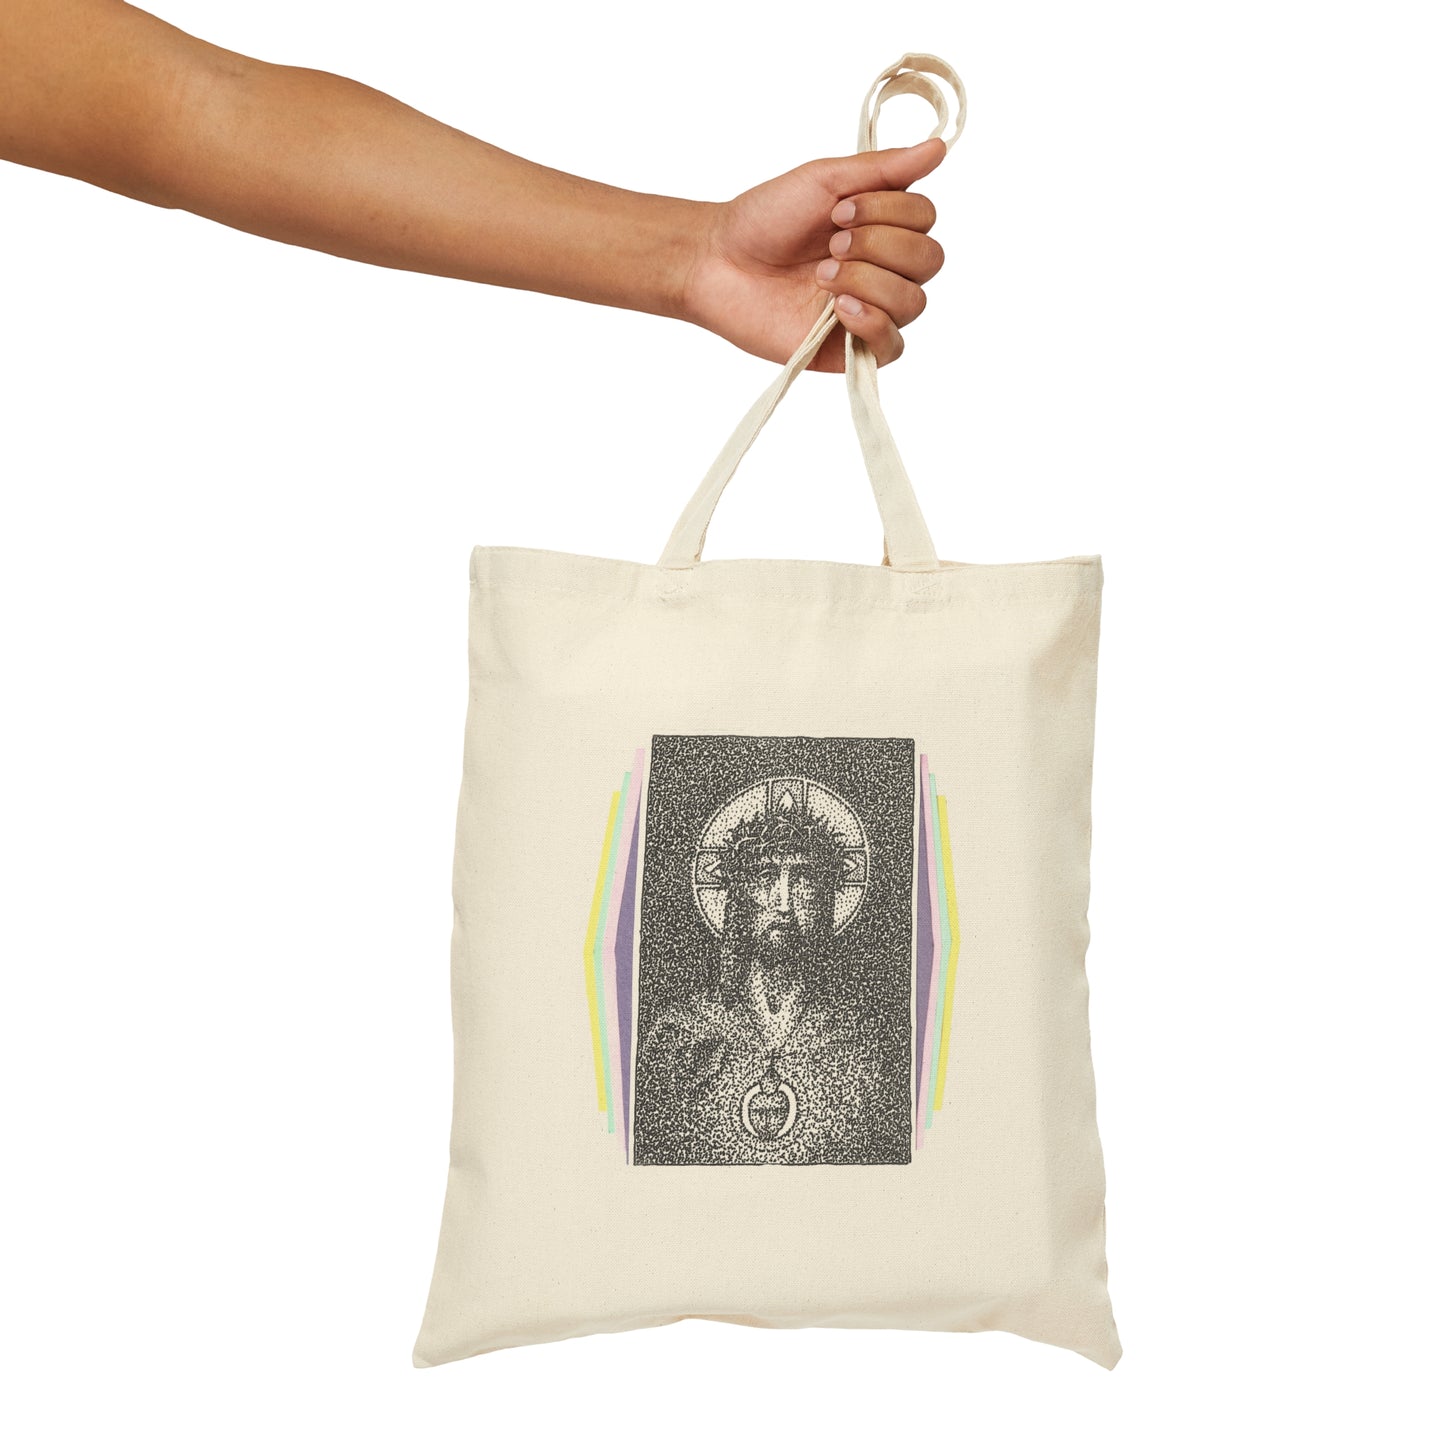 Face of Christ Tote Bag